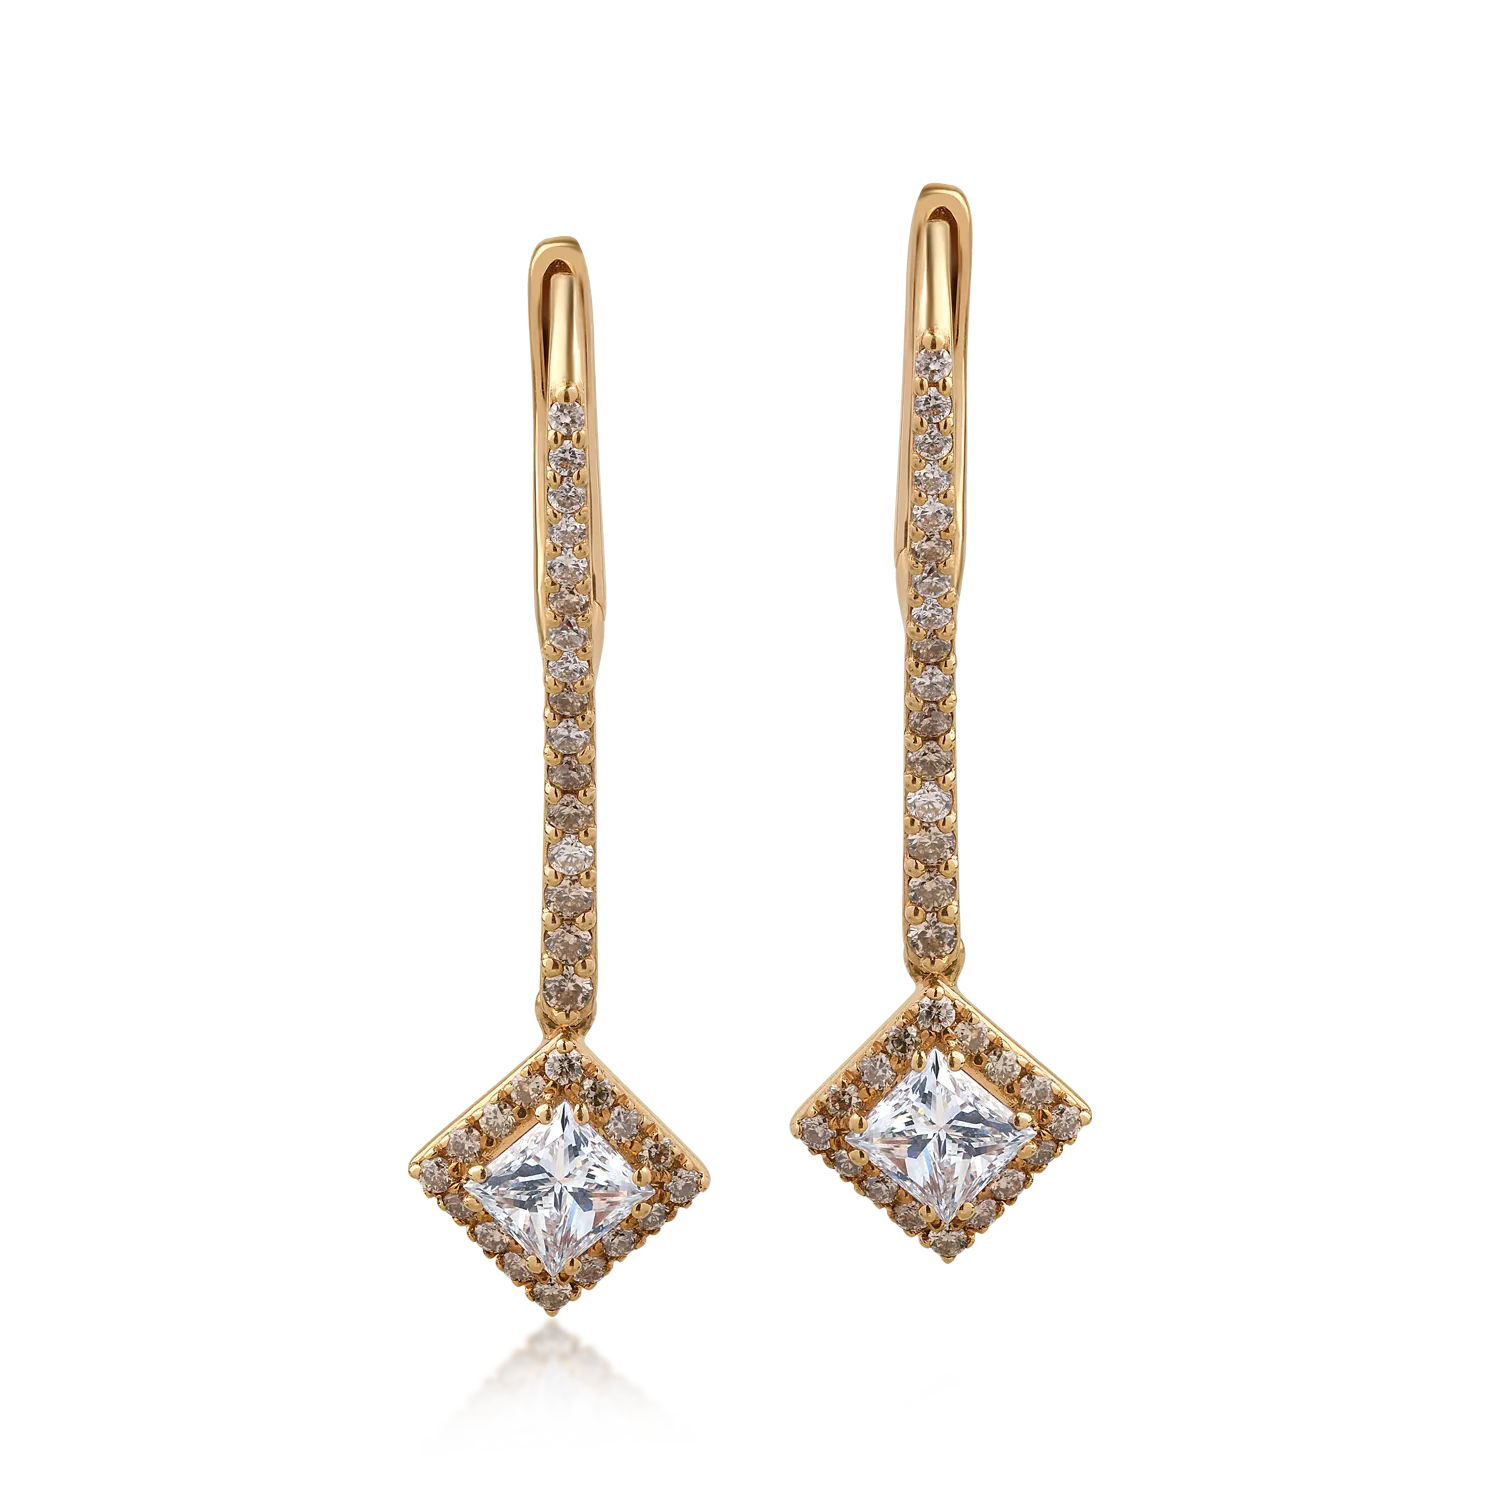 18K rose gold earrings with 1.22ct clear diamonds and 0.45ct brown diamonds